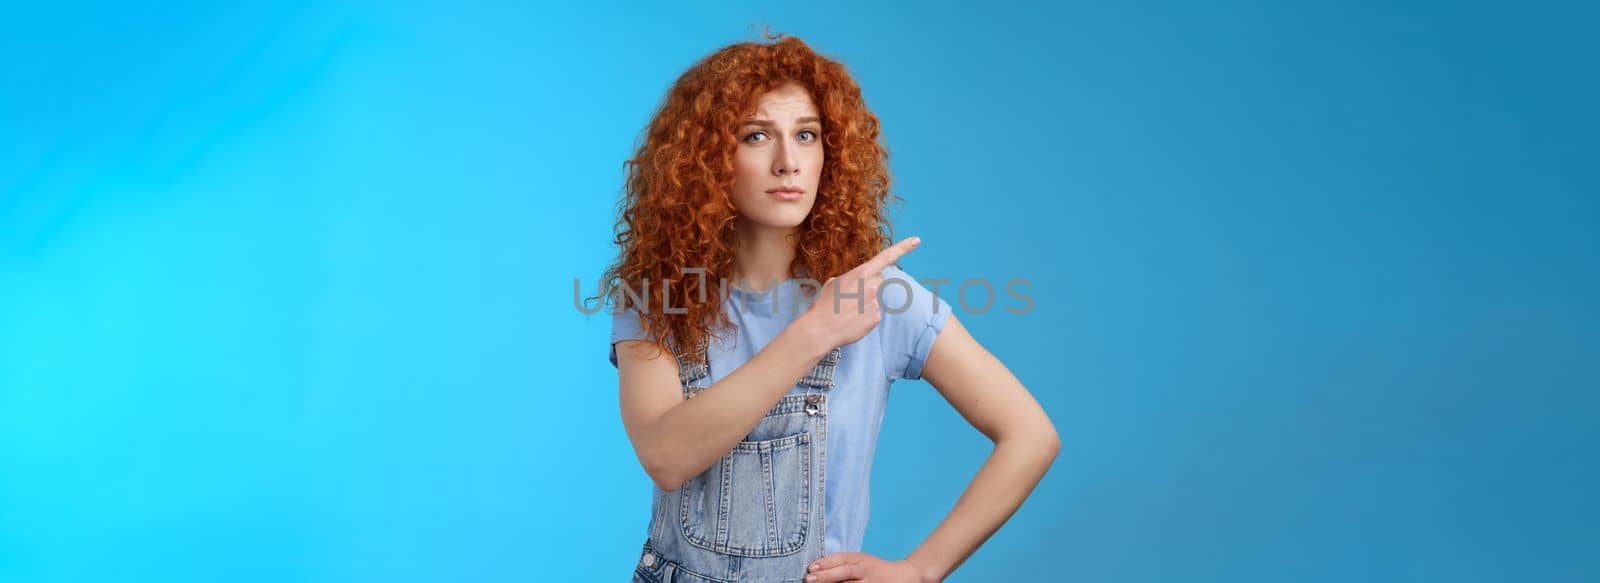 Unsure silly timid hesitant cute redhead curly-haired ginger girl frowning uncertain asking your opinion questioned look camera pointing upper left corner confused worried blue background by Benzoix